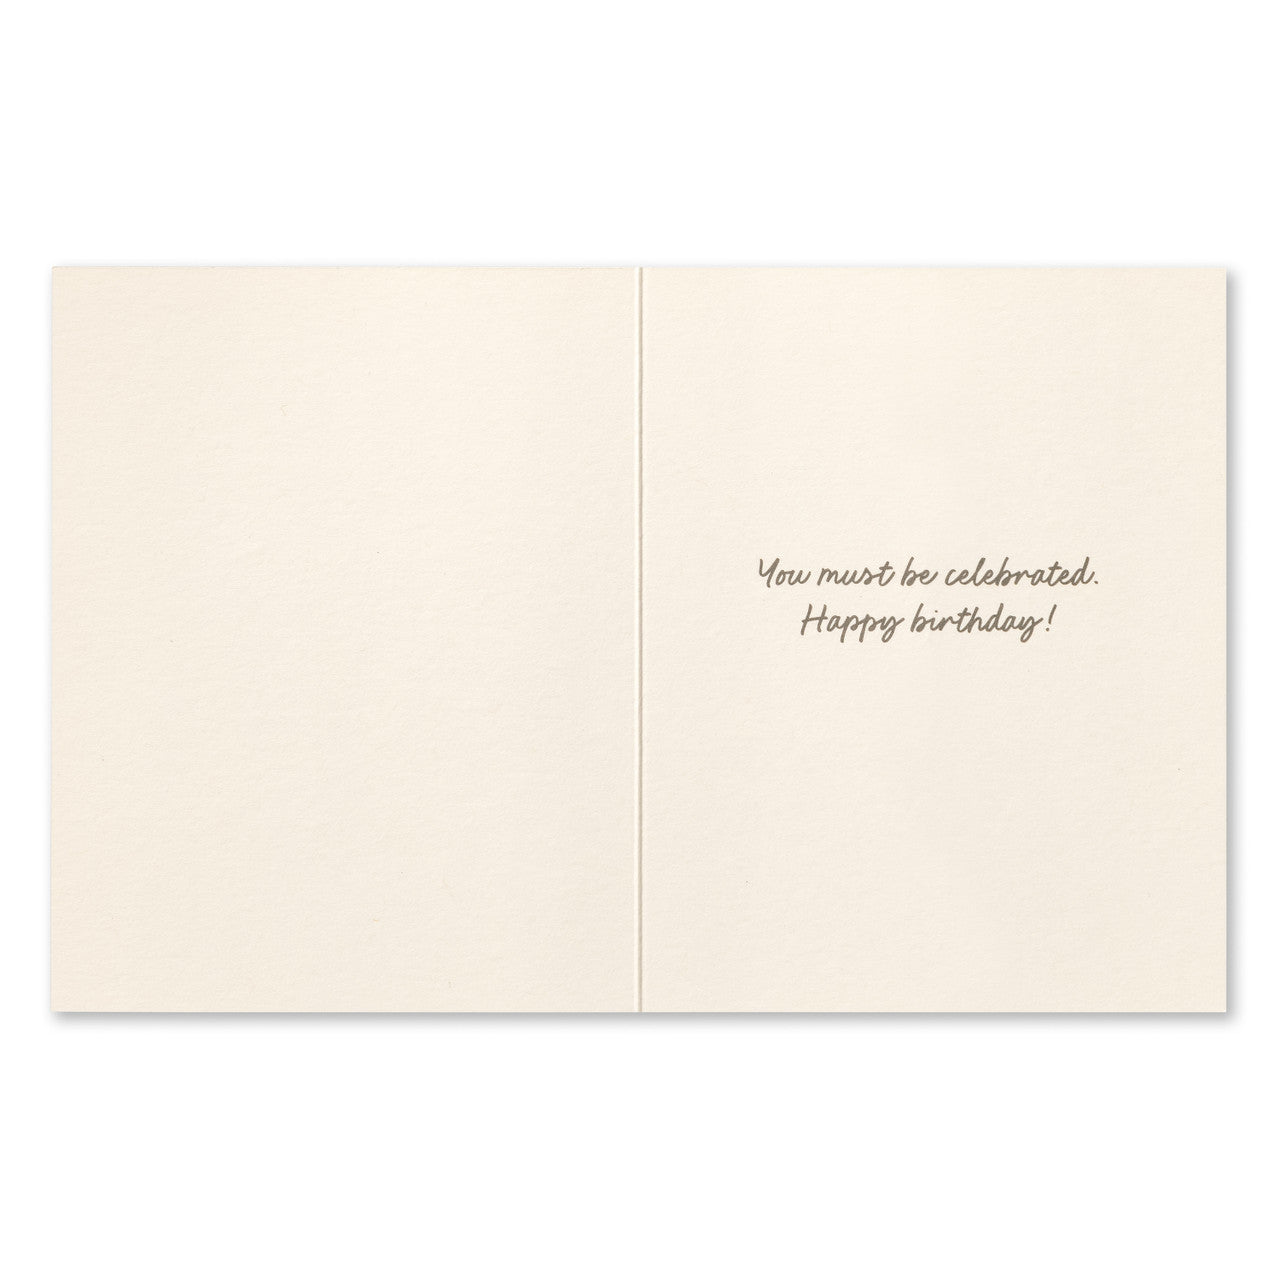 Love Muchly Greeting Card - Birthday - I Couldn't Help Myself... - Mellow Monkey